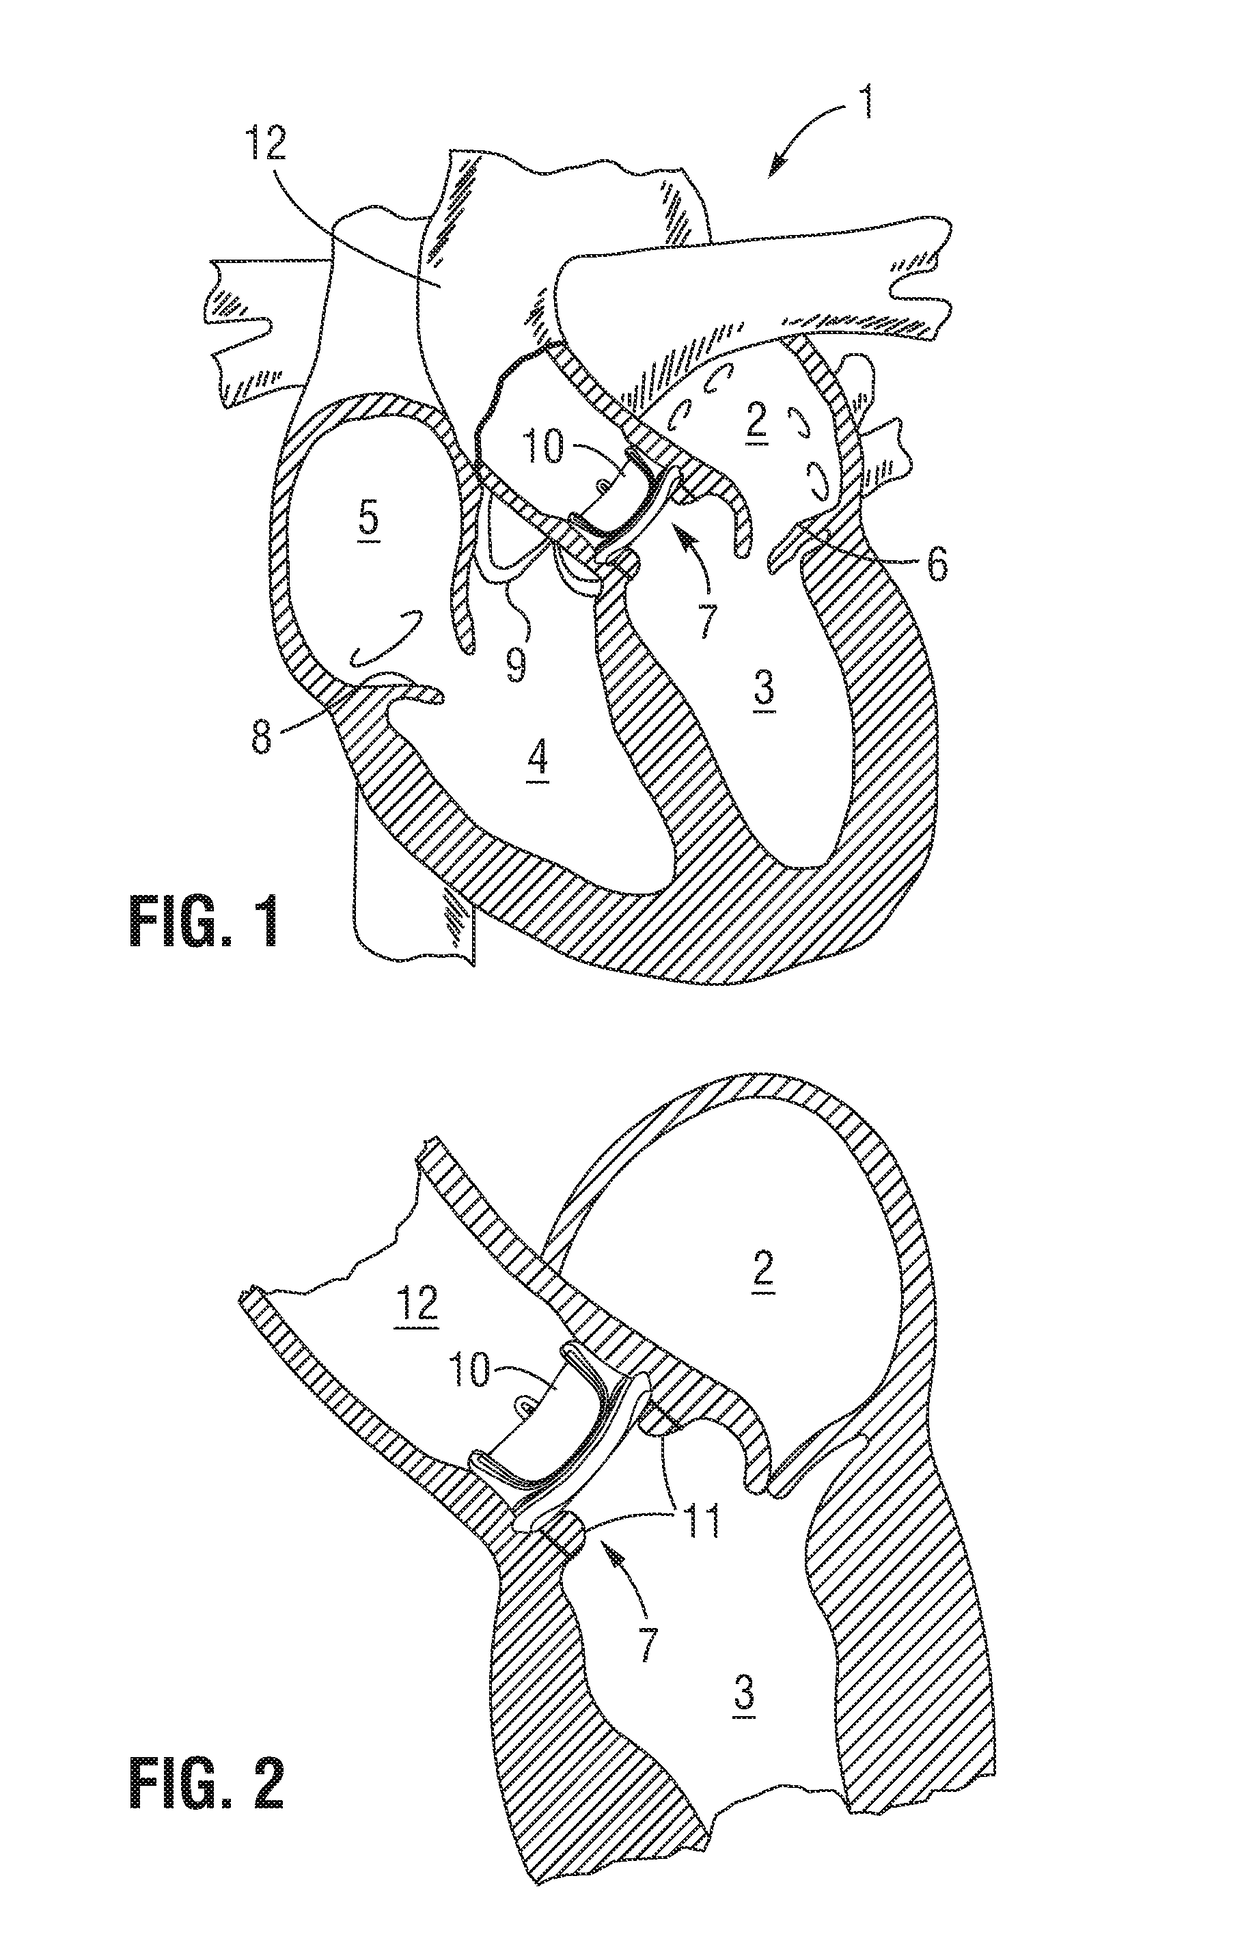 Valve implant with integrated sensor and transmitter